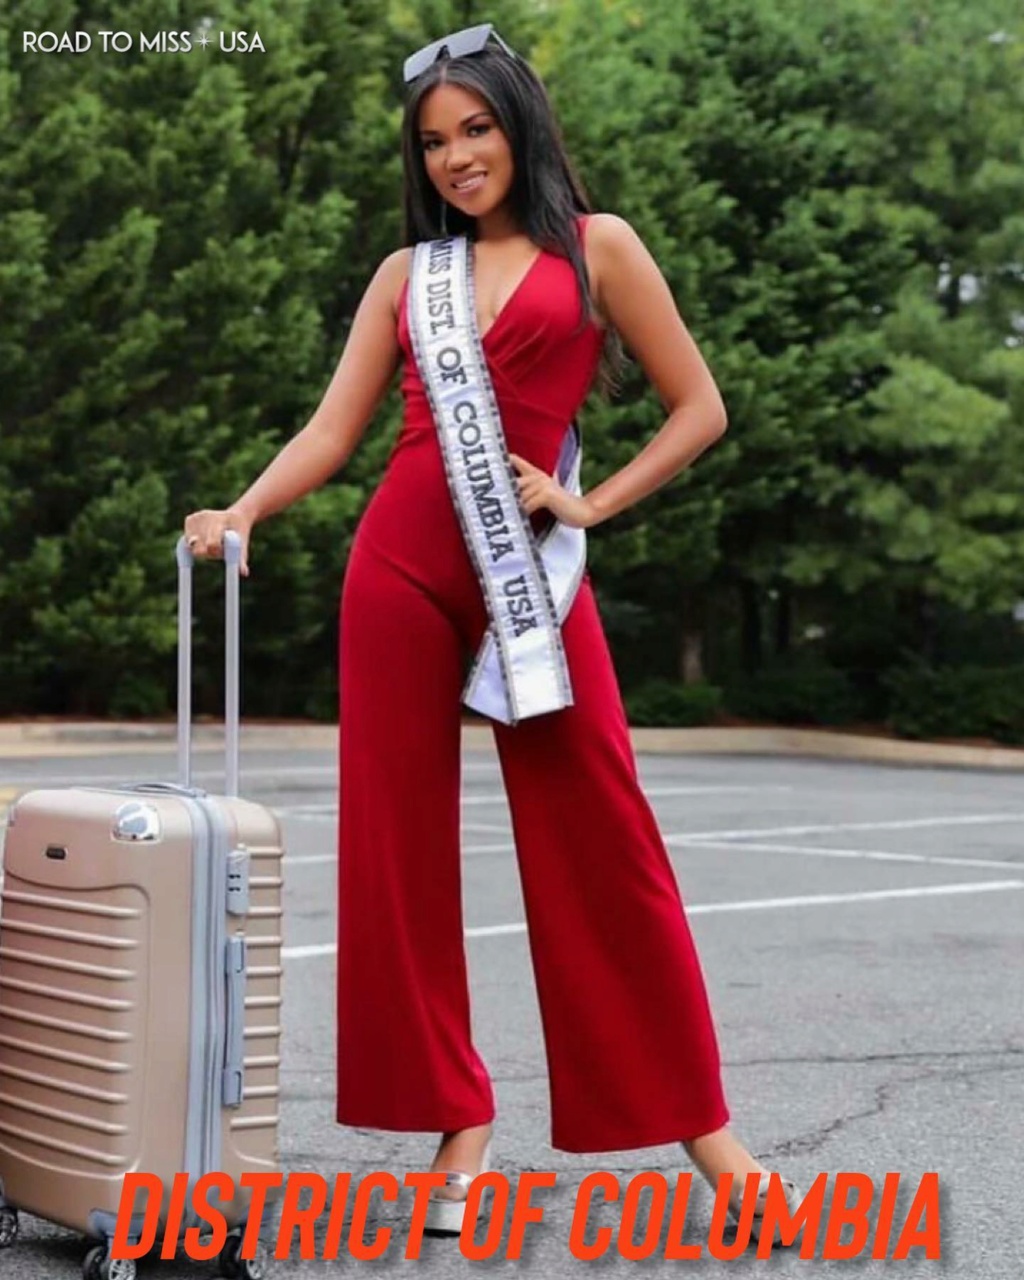 ROAD TO MISS USA 2021 is KENTUCKY! - Page 3 24105710